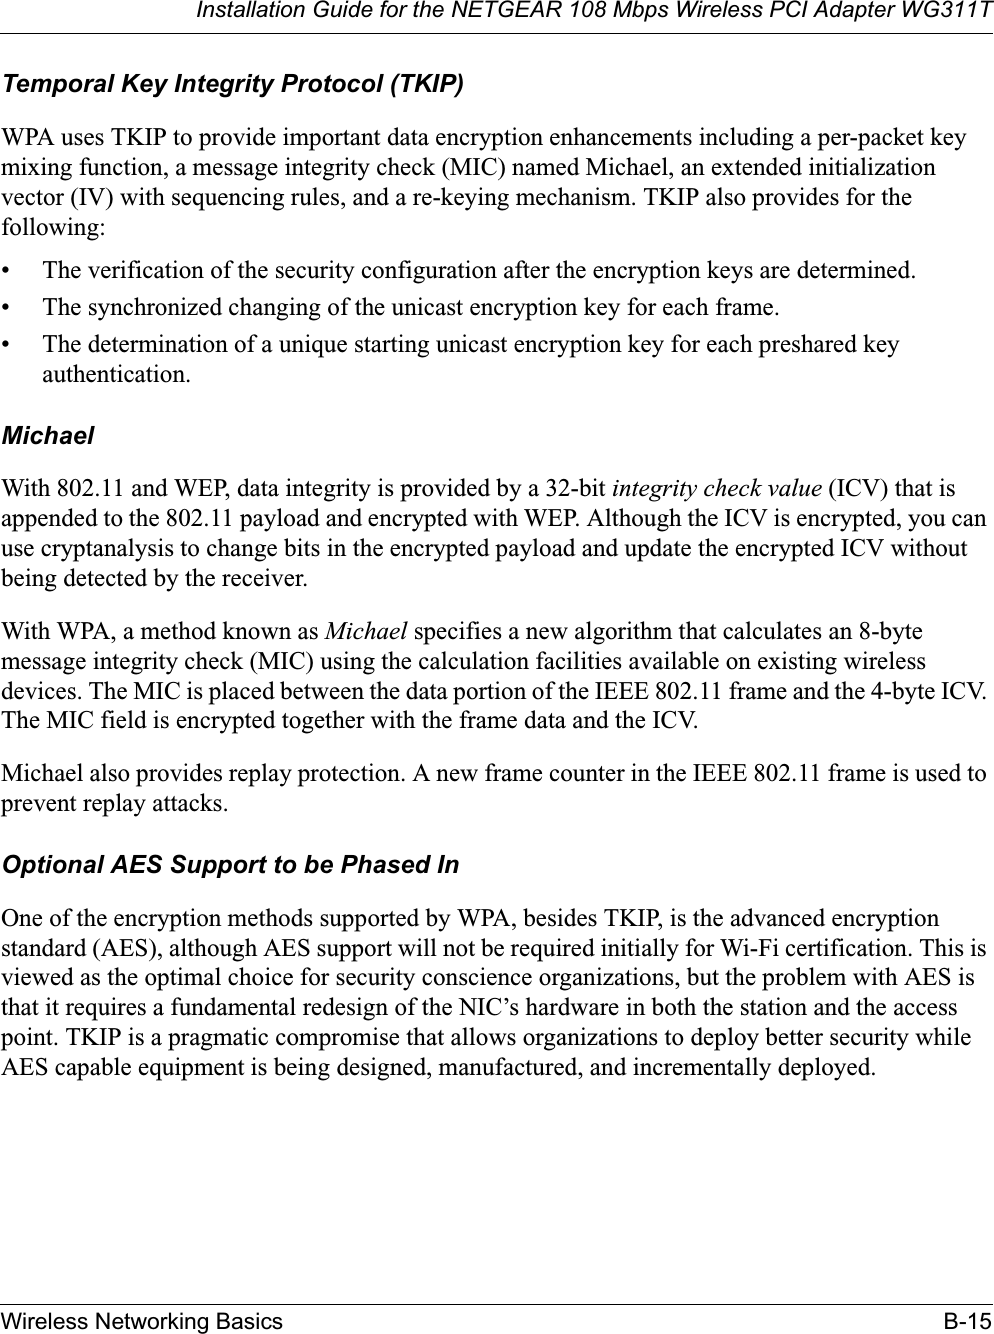 Installation Guide for the NETGEAR 108 Mbps Wireless PCI Adapter WG311TWireless Networking Basics B-15Temporal Key Integrity Protocol (TKIP)WPA uses TKIP to provide important data encryption enhancements including a per-packet key mixing function, a message integrity check (MIC) named Michael, an extended initialization vector (IV) with sequencing rules, and a re-keying mechanism. TKIP also provides for the following:• The verification of the security configuration after the encryption keys are determined. • The synchronized changing of the unicast encryption key for each frame. • The determination of a unique starting unicast encryption key for each preshared key authentication.MichaelWith 802.11 and WEP, data integrity is provided by a 32-bit integrity check value (ICV) that is appended to the 802.11 payload and encrypted with WEP. Although the ICV is encrypted, you can use cryptanalysis to change bits in the encrypted payload and update the encrypted ICV without being detected by the receiver.With WPA, a method known as Michael specifies a new algorithm that calculates an 8-byte message integrity check (MIC) using the calculation facilities available on existing wireless devices. The MIC is placed between the data portion of the IEEE 802.11 frame and the 4-byte ICV. The MIC field is encrypted together with the frame data and the ICV.Michael also provides replay protection. A new frame counter in the IEEE 802.11 frame is used to prevent replay attacks.Optional AES Support to be Phased InOne of the encryption methods supported by WPA, besides TKIP, is the advanced encryption standard (AES), although AES support will not be required initially for Wi-Fi certification. This is viewed as the optimal choice for security conscience organizations, but the problem with AES is that it requires a fundamental redesign of the NIC’s hardware in both the station and the access point. TKIP is a pragmatic compromise that allows organizations to deploy better security while AES capable equipment is being designed, manufactured, and incrementally deployed.